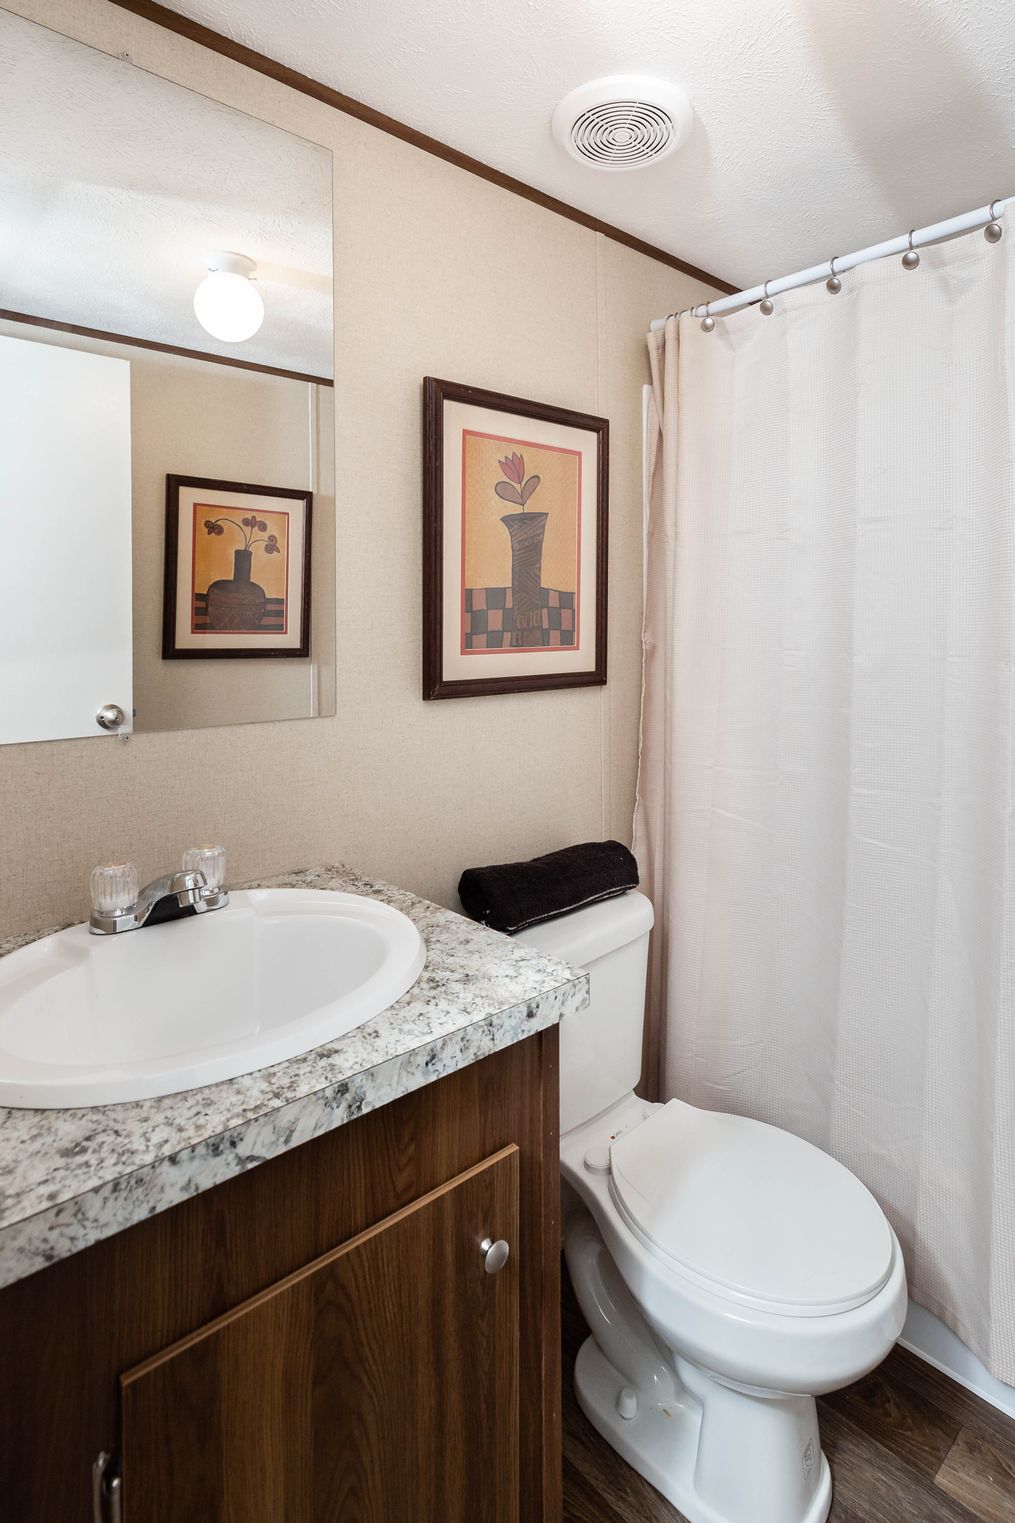 The GRAND Master Bathroom. This Manufactured Mobile Home features 4 bedrooms and 2 baths.